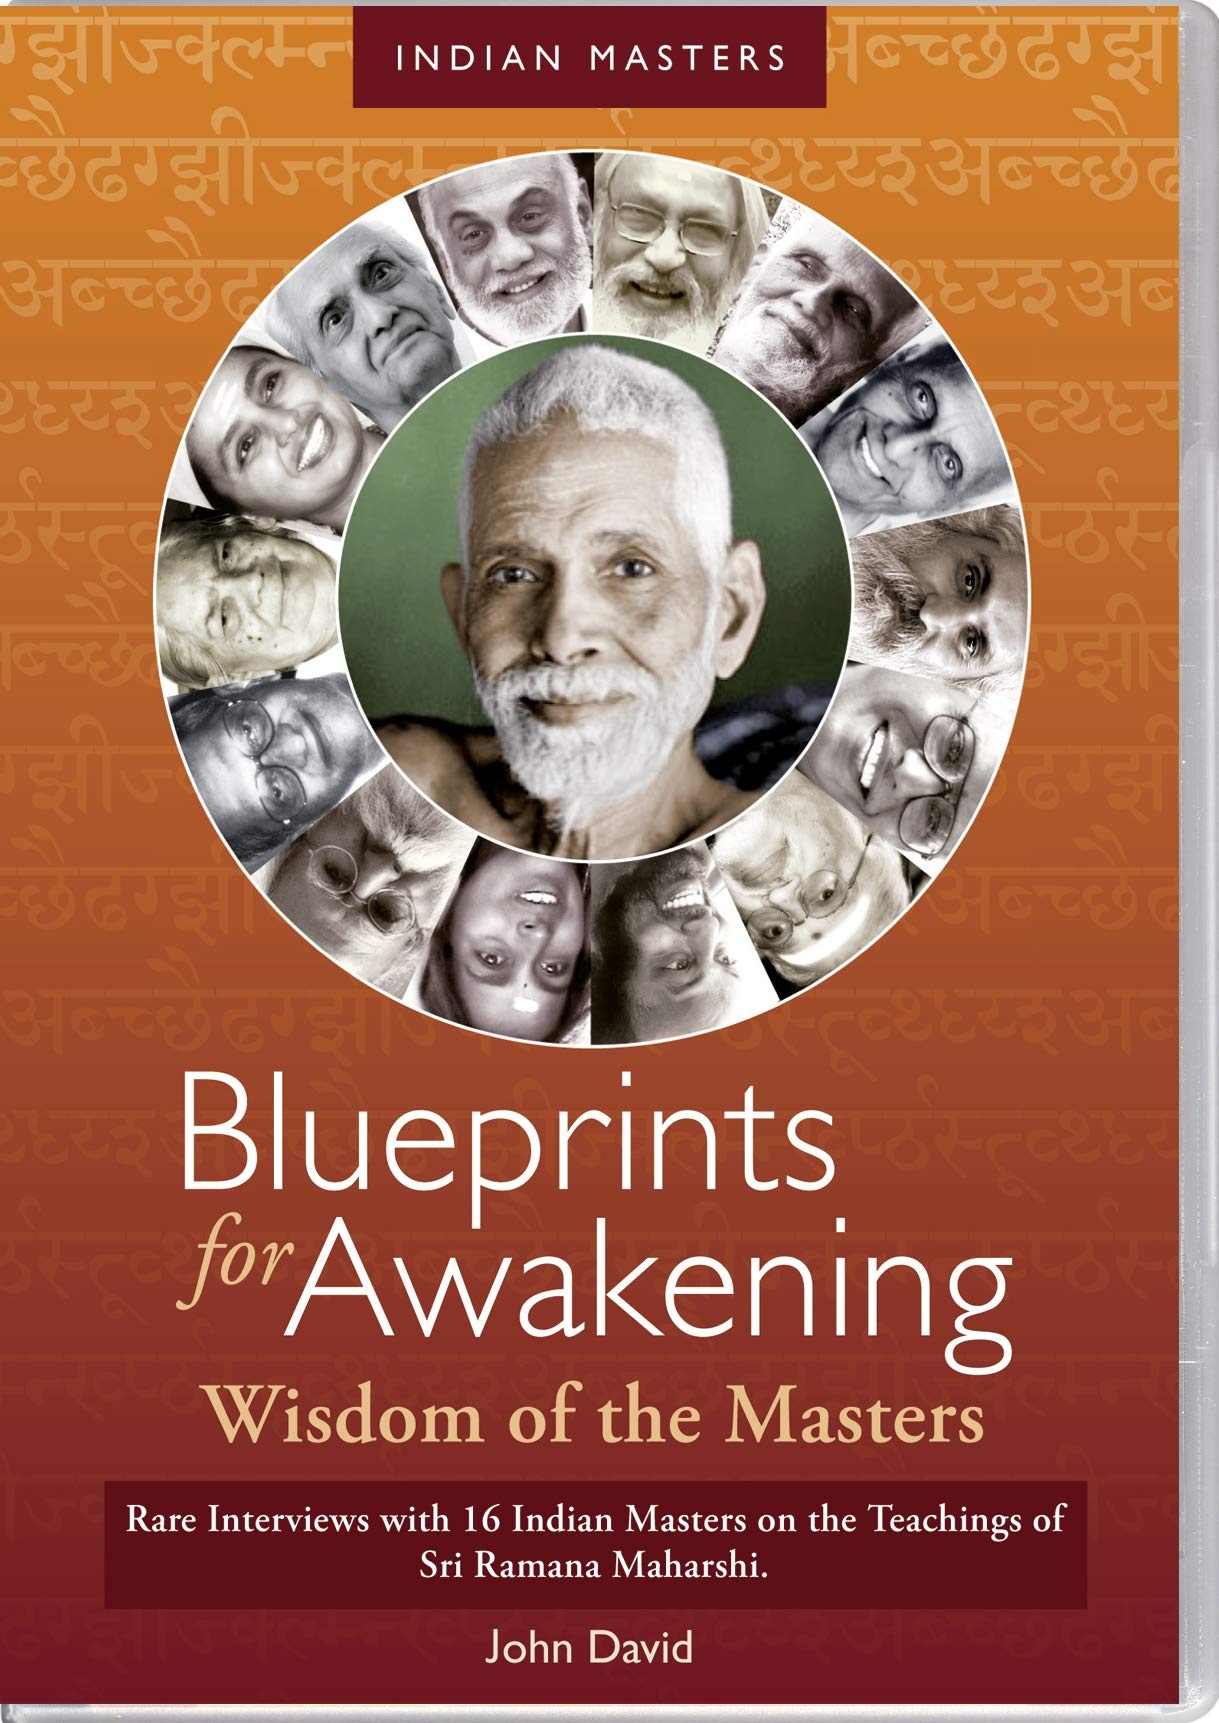 Blueprints for Awakening - Wisdom of the Masters: Rare Interviews with 16 Indian Masters on the Teachings of Sri Ramana Maharshi